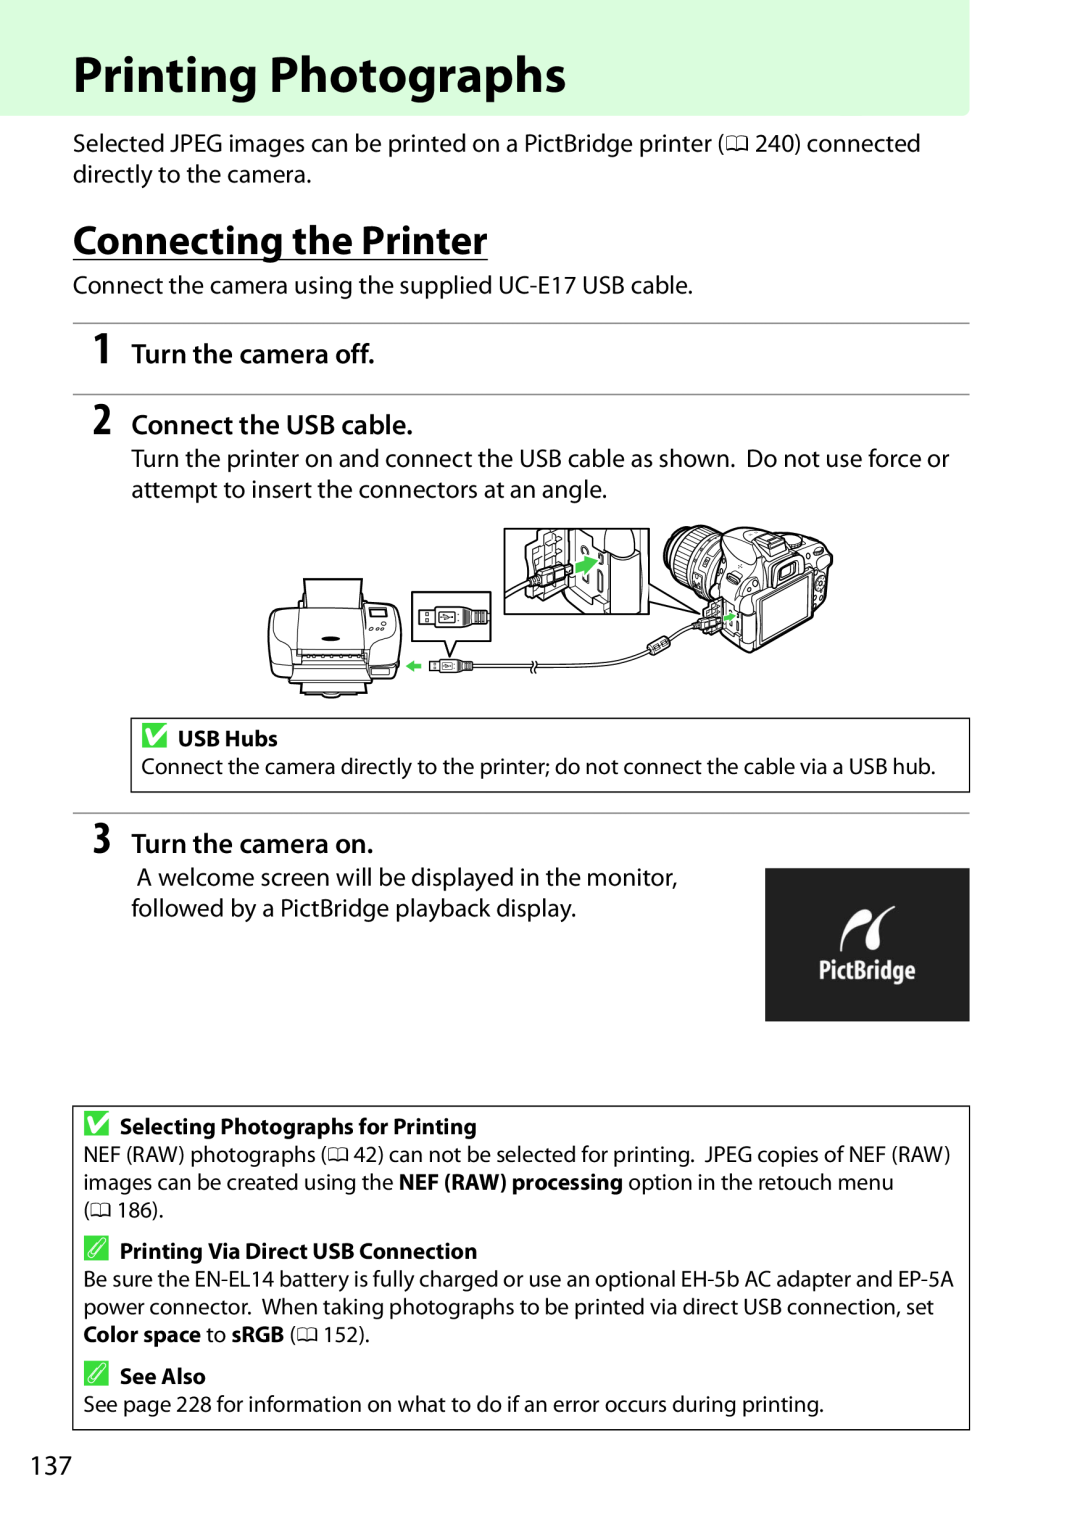 Nikon D5200 18-55mm Kit Black Printing Photographs, Connecting the Printer, Turn the camera off 2 Connect the USB cable 